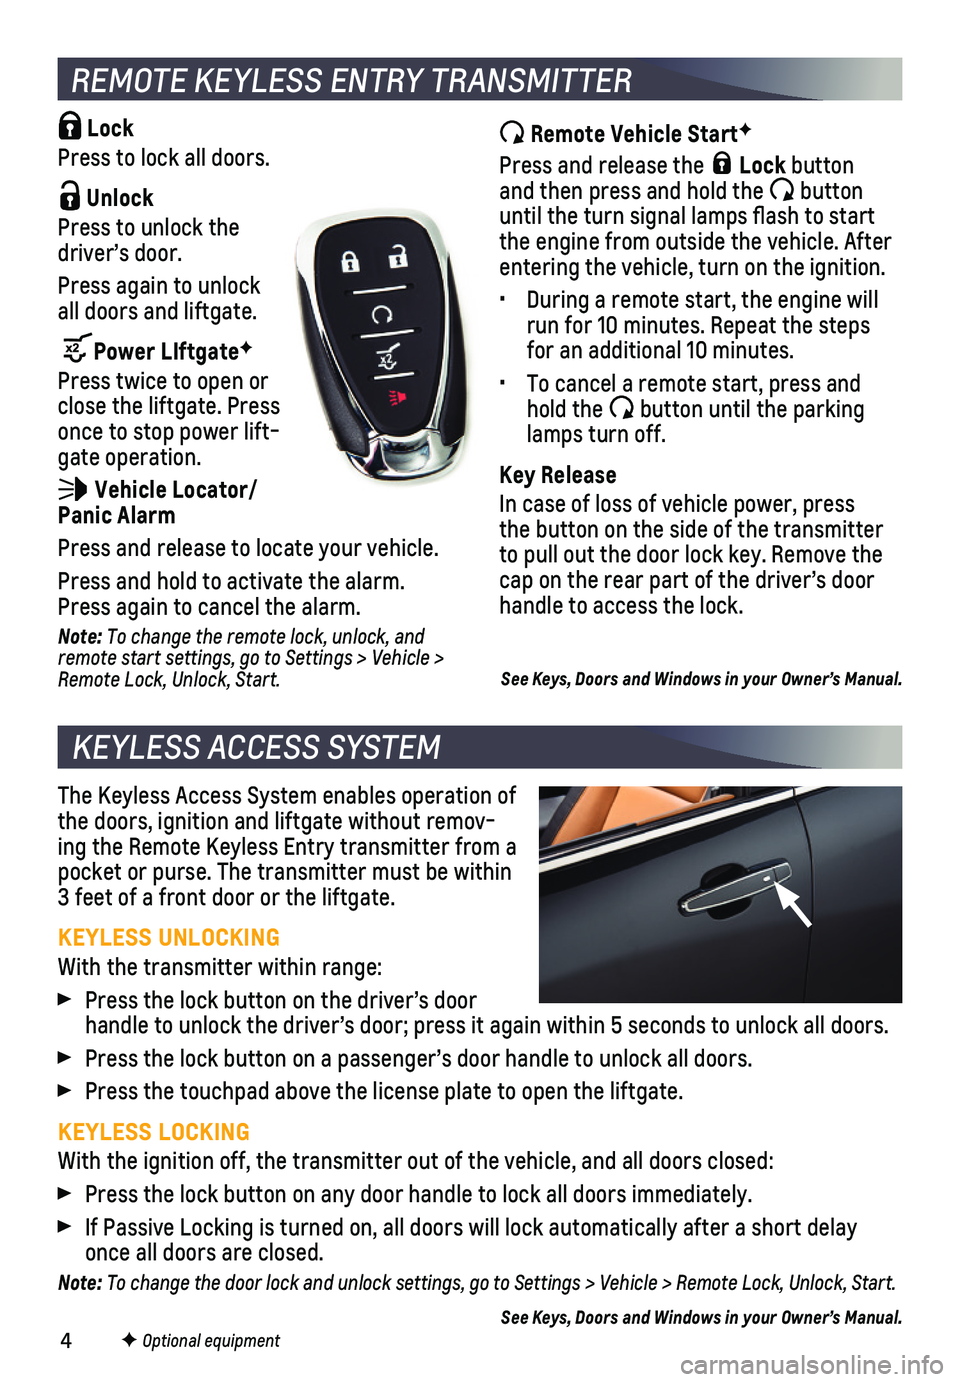 CHEVROLET EQUINOX 2018  Get To Know Guide 4
The Keyless Access System enables operation of the doors, ignition and liftgate without remov-ing the Remote Keyless Entry transmitter from a pocket or purse. The transmitter must be within  3 feet 